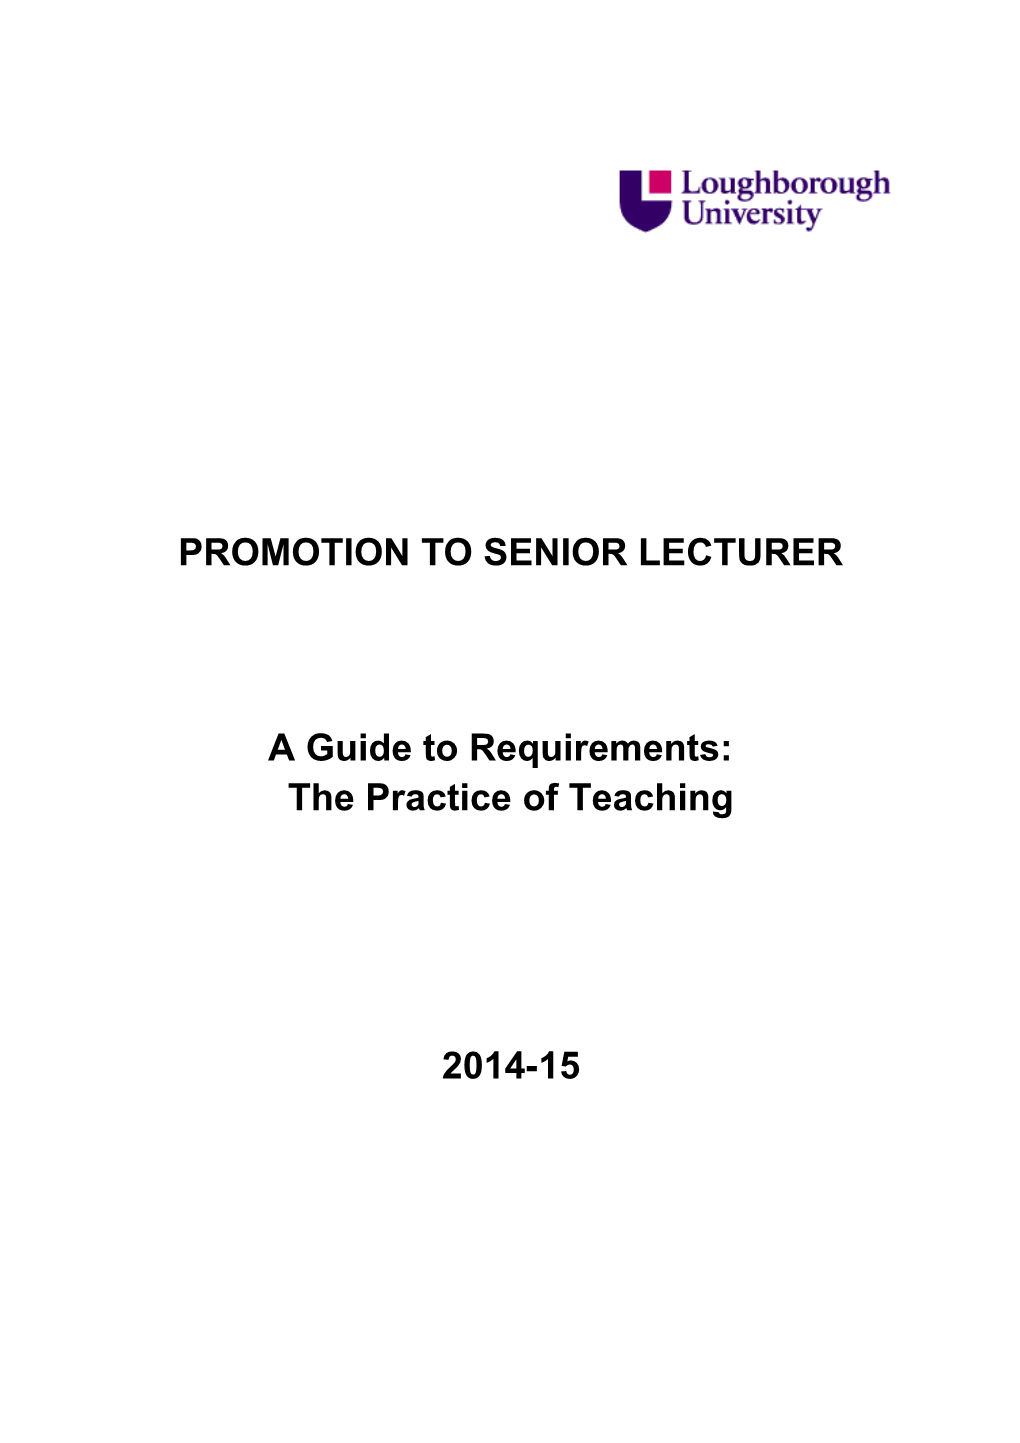 Promotions to Senior Lecturer